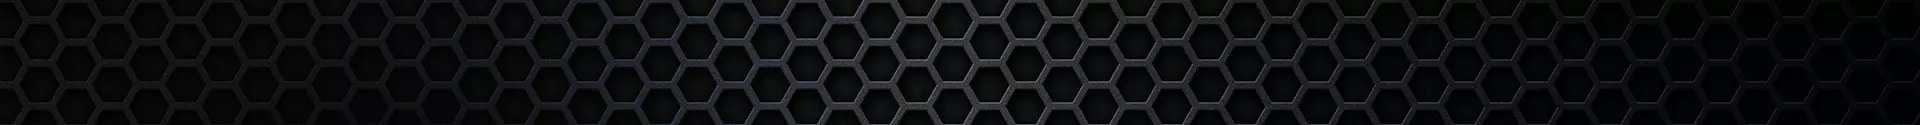 Black background with grey hexagons